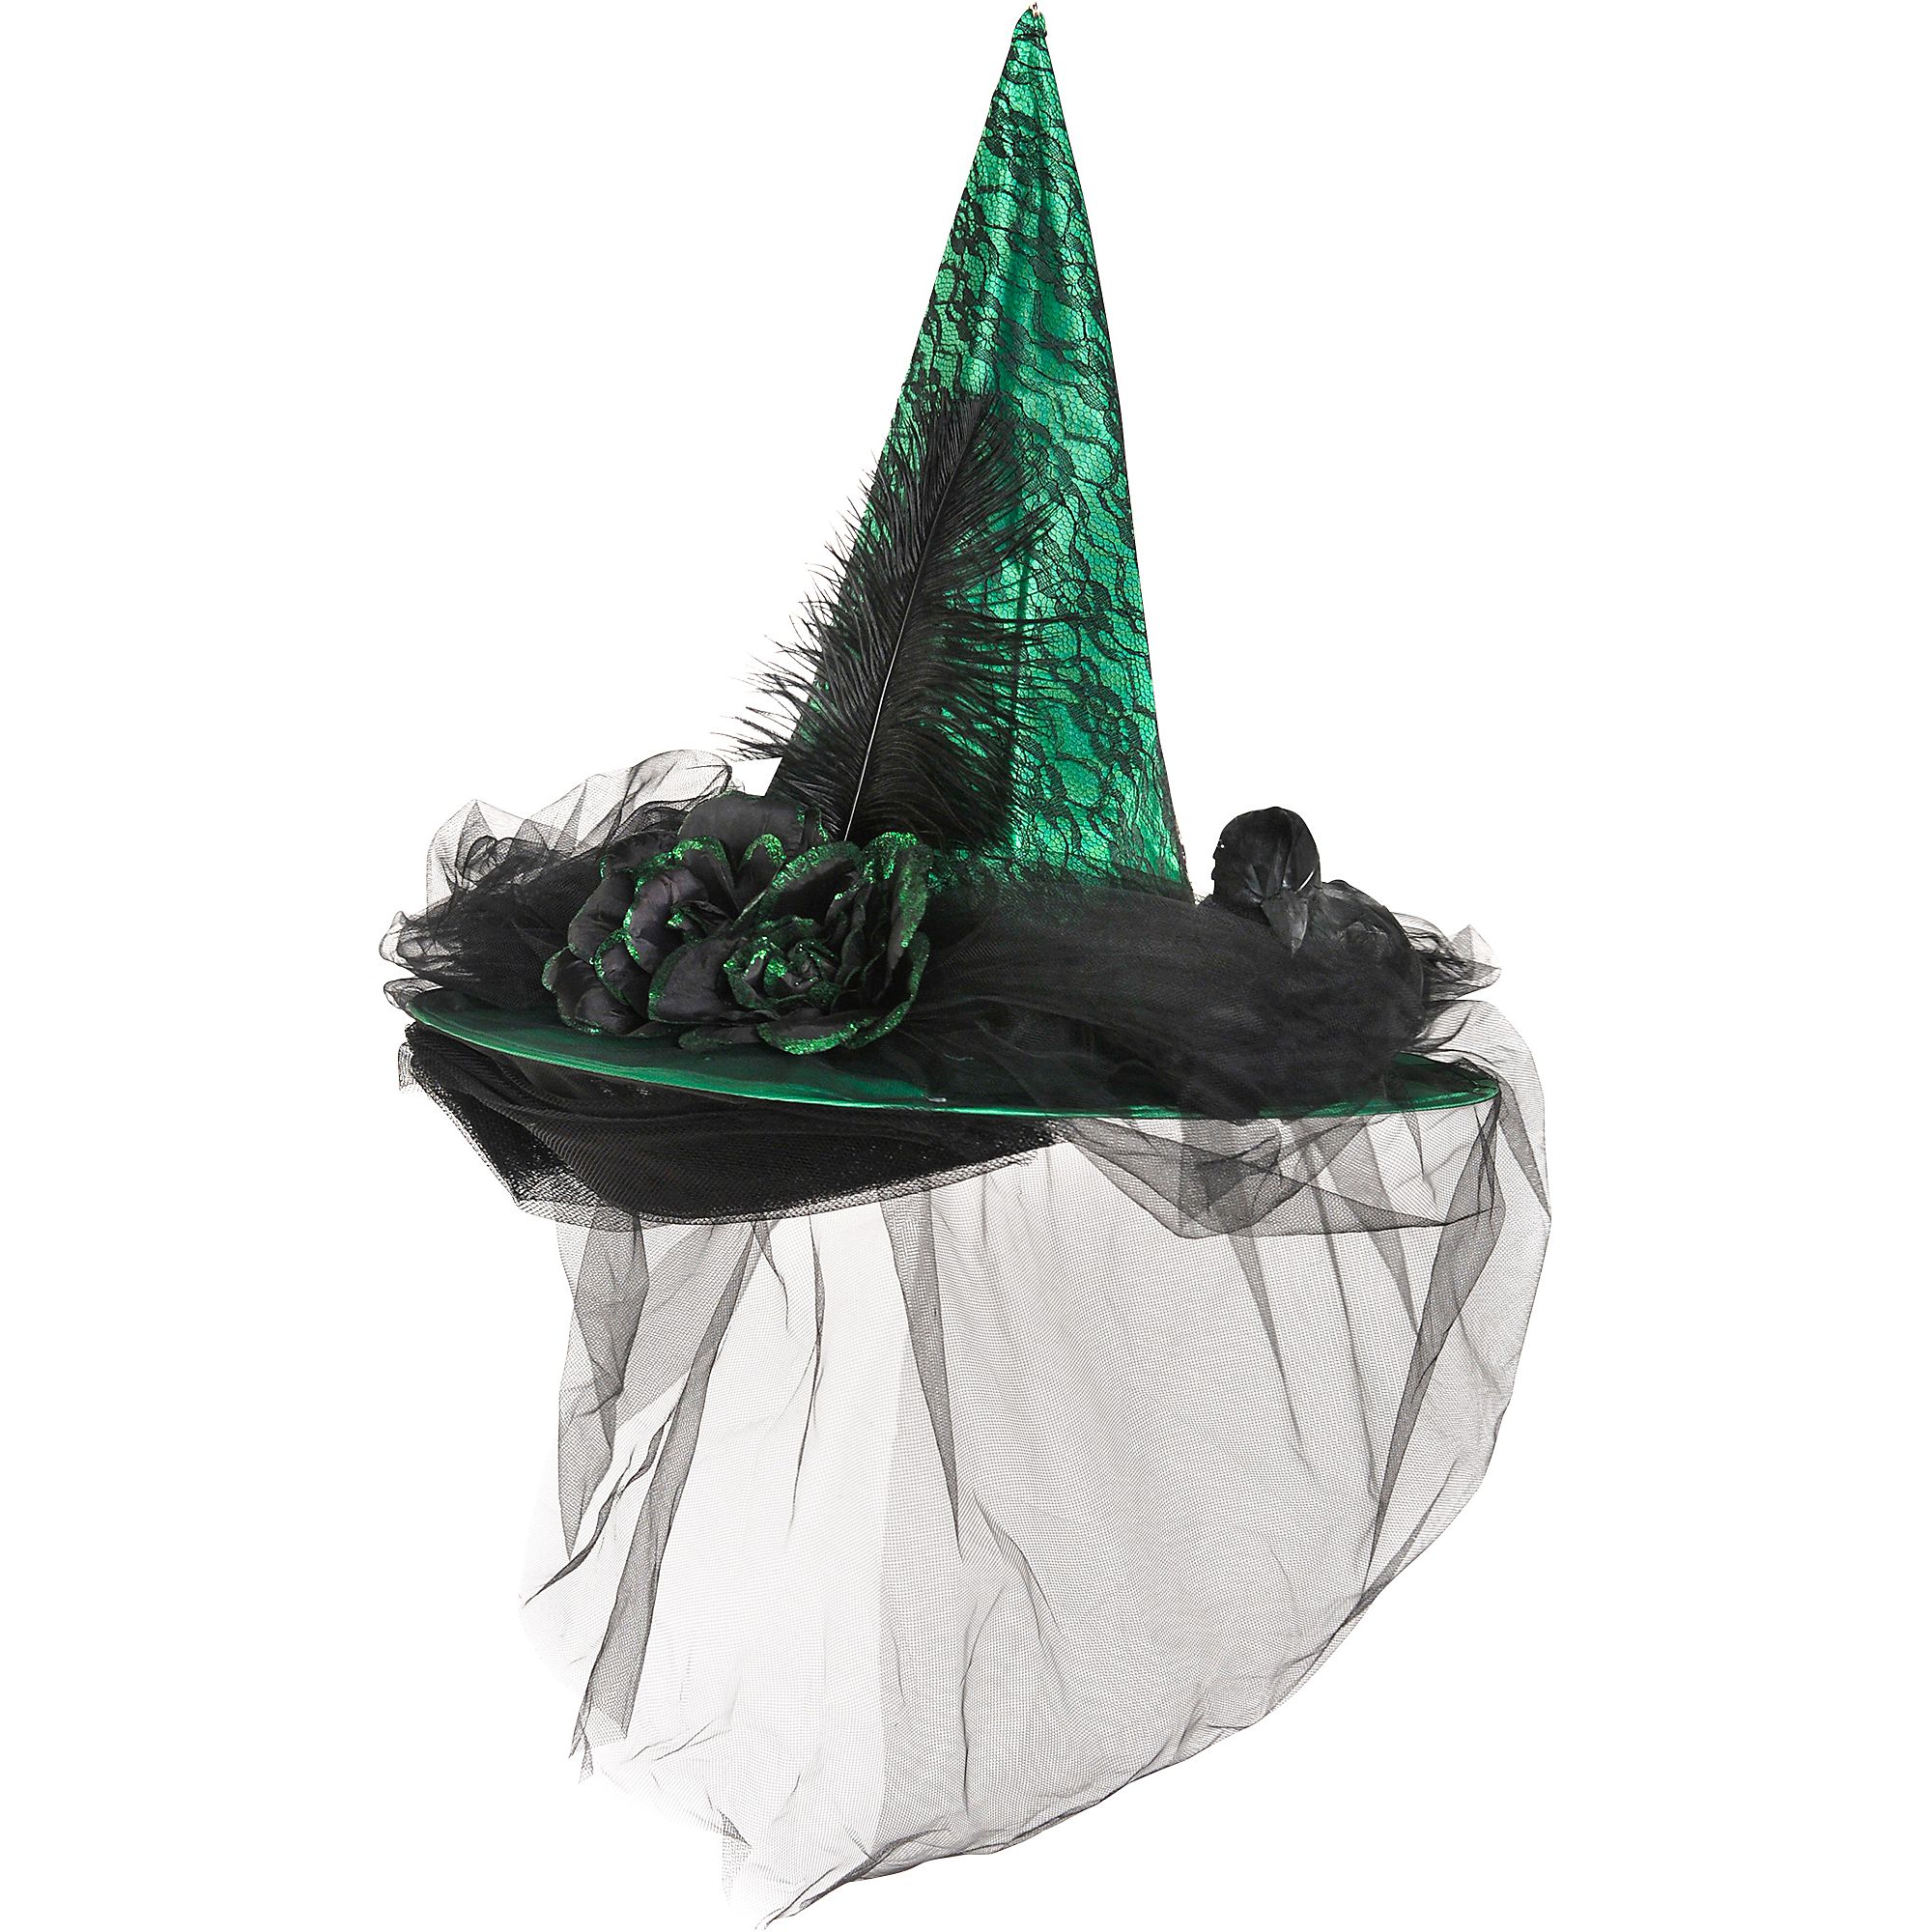 Green Witch Hat Halloween Costume Accessories, One Size 809801734578 | eBay